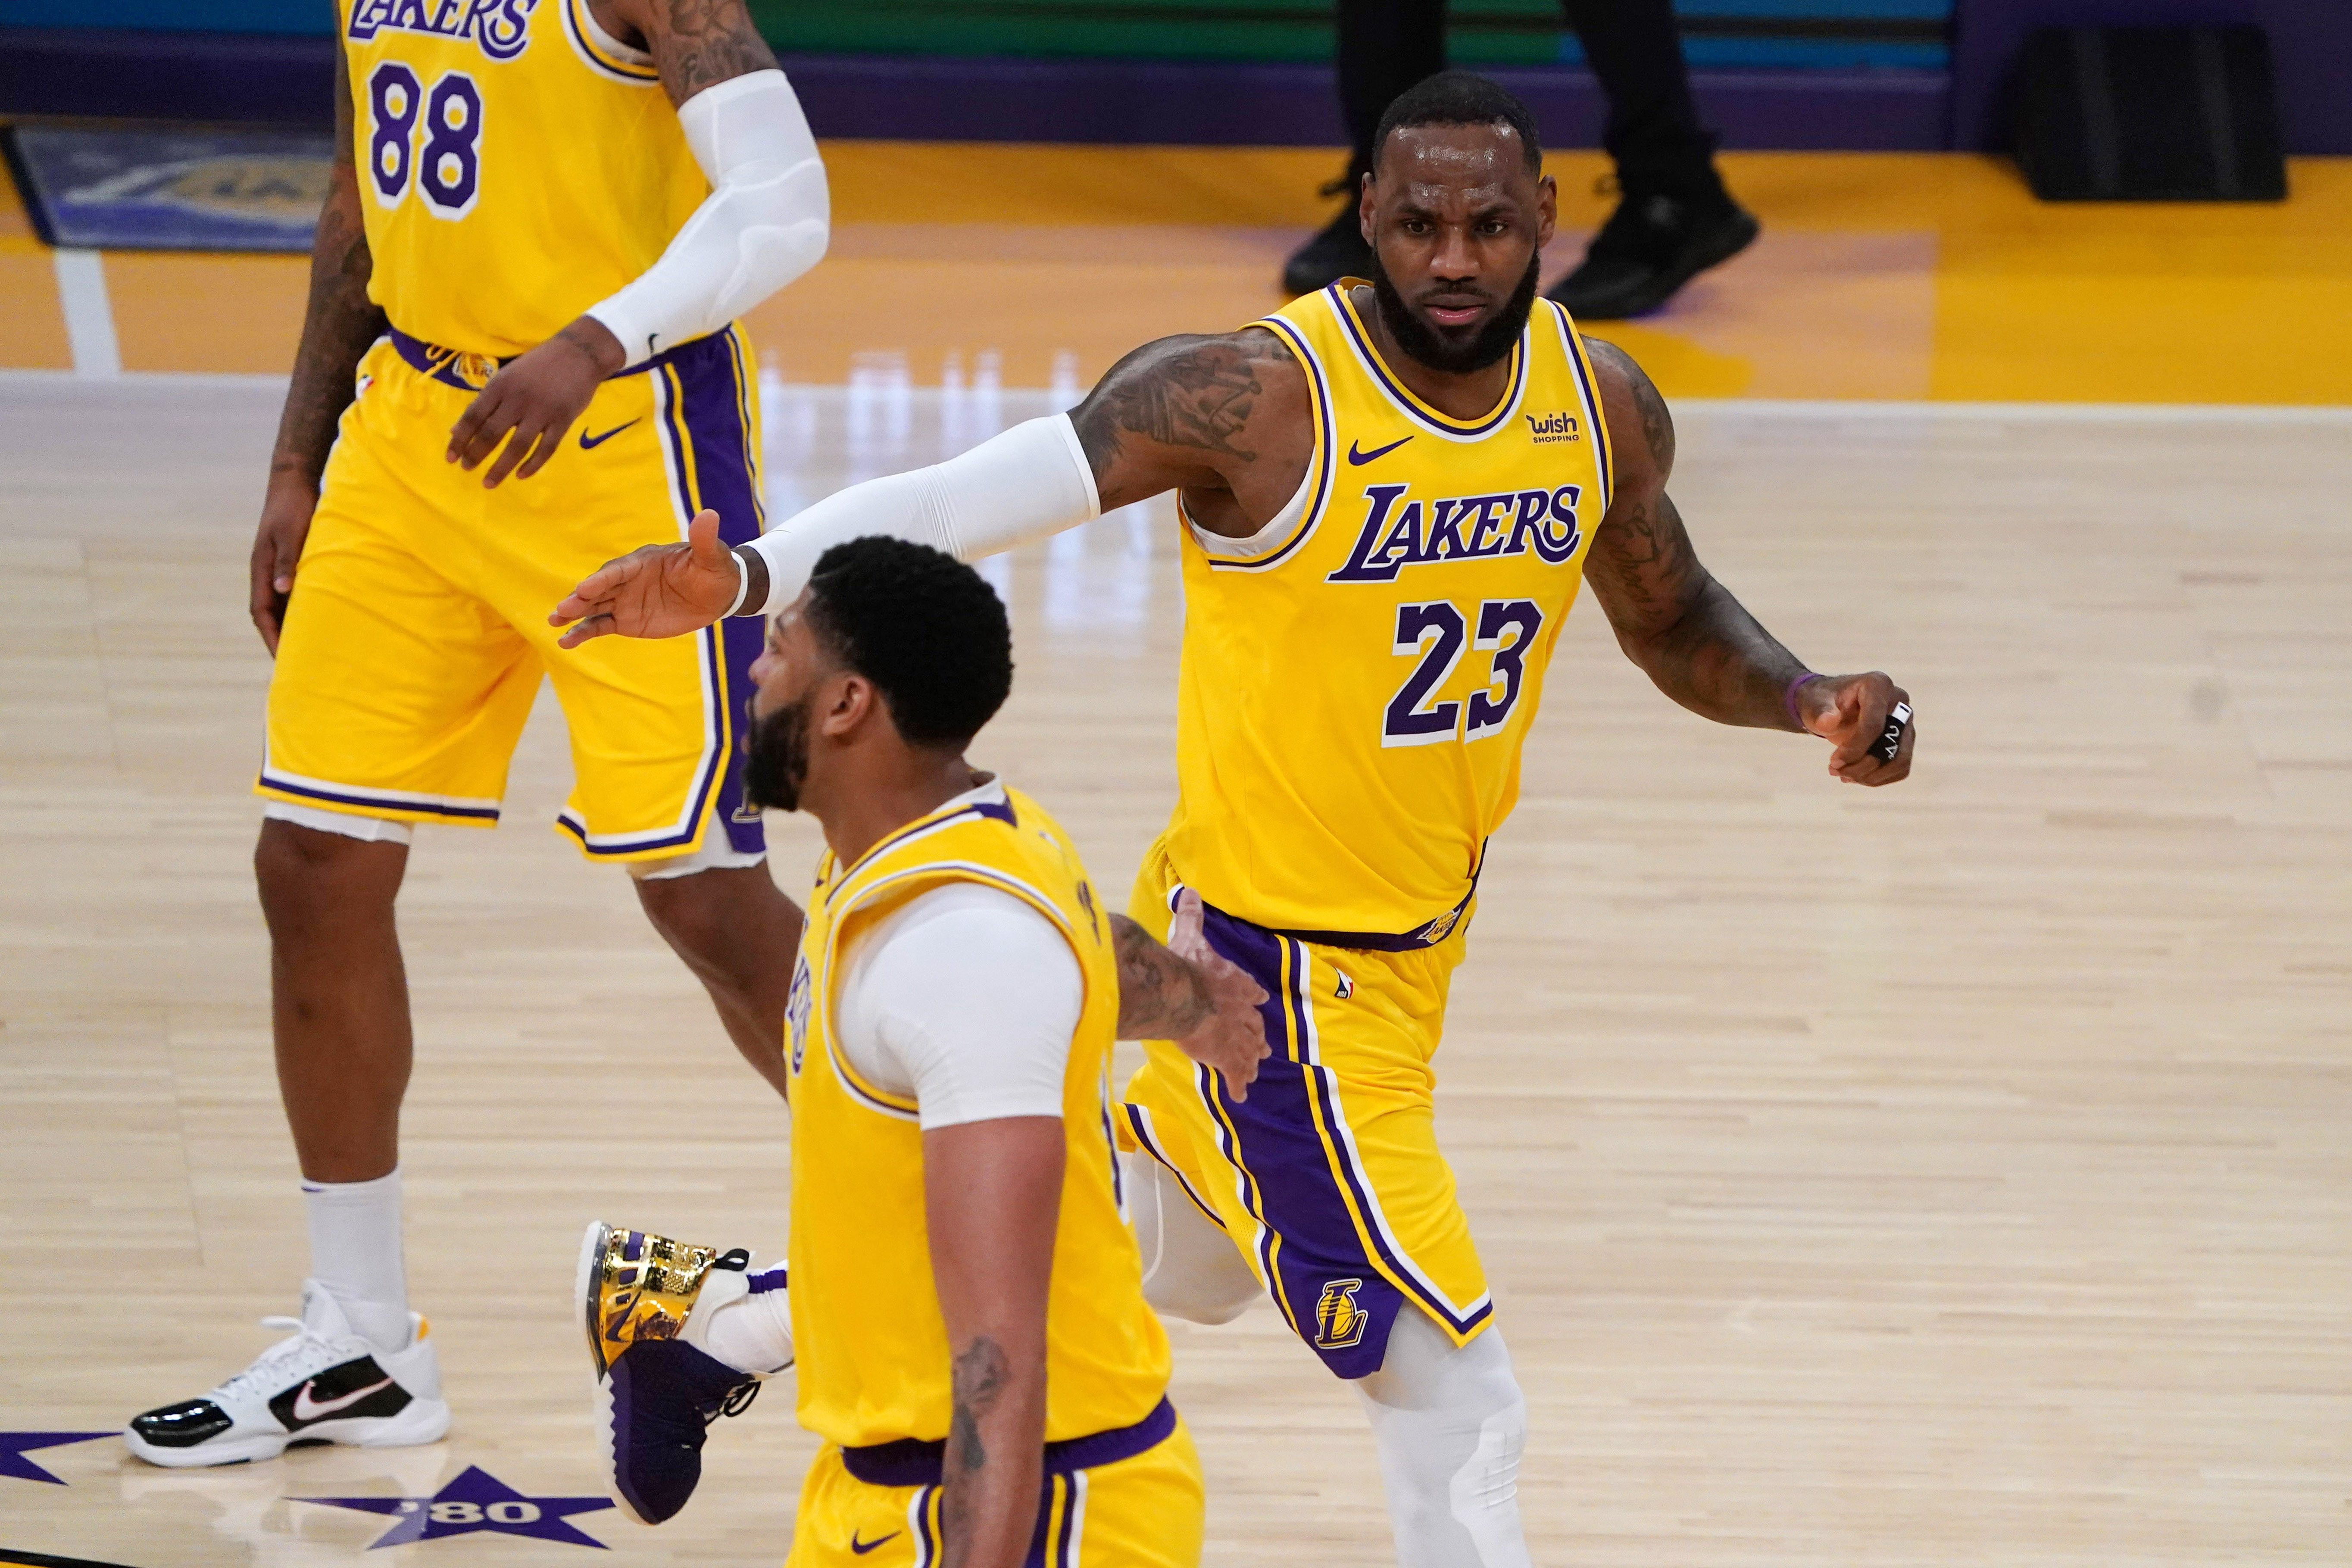 LeBron’s Lakers are the NBA’s best, but not unbeatable